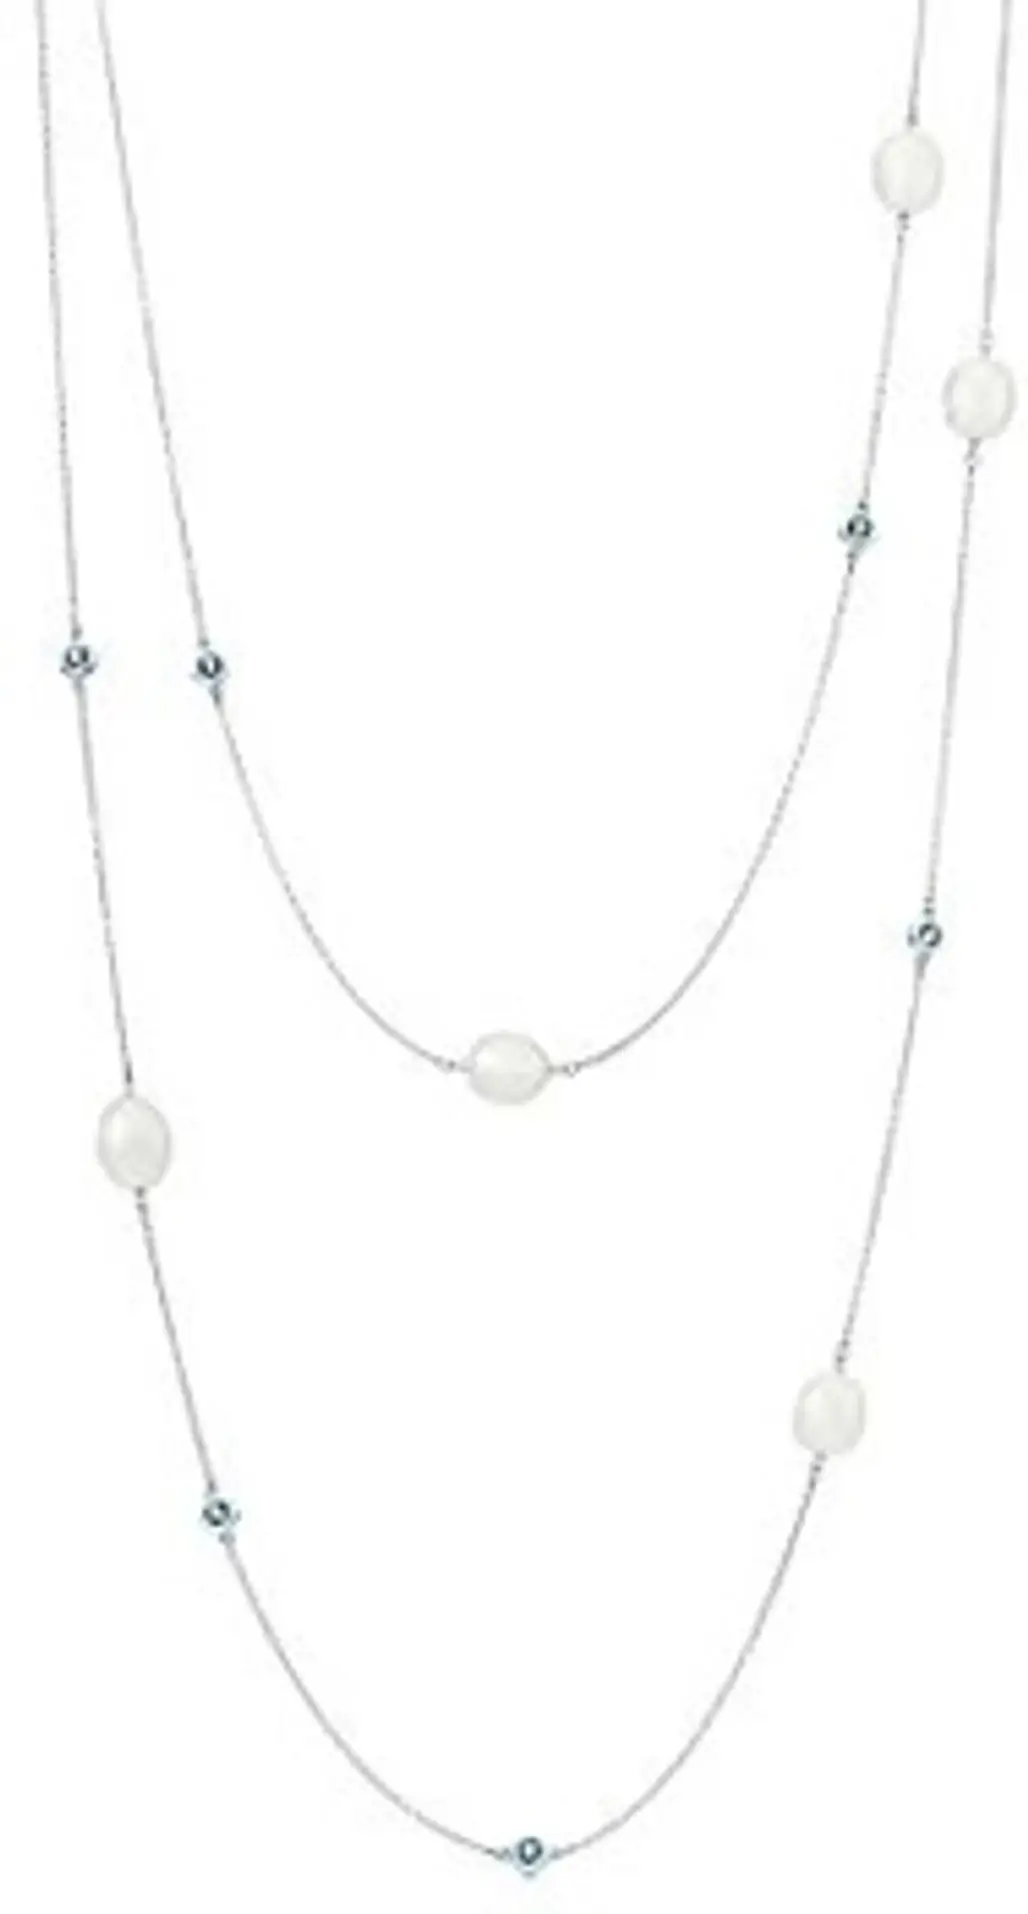 Tiffany Elsa Peretti Color by the Yard Necklace